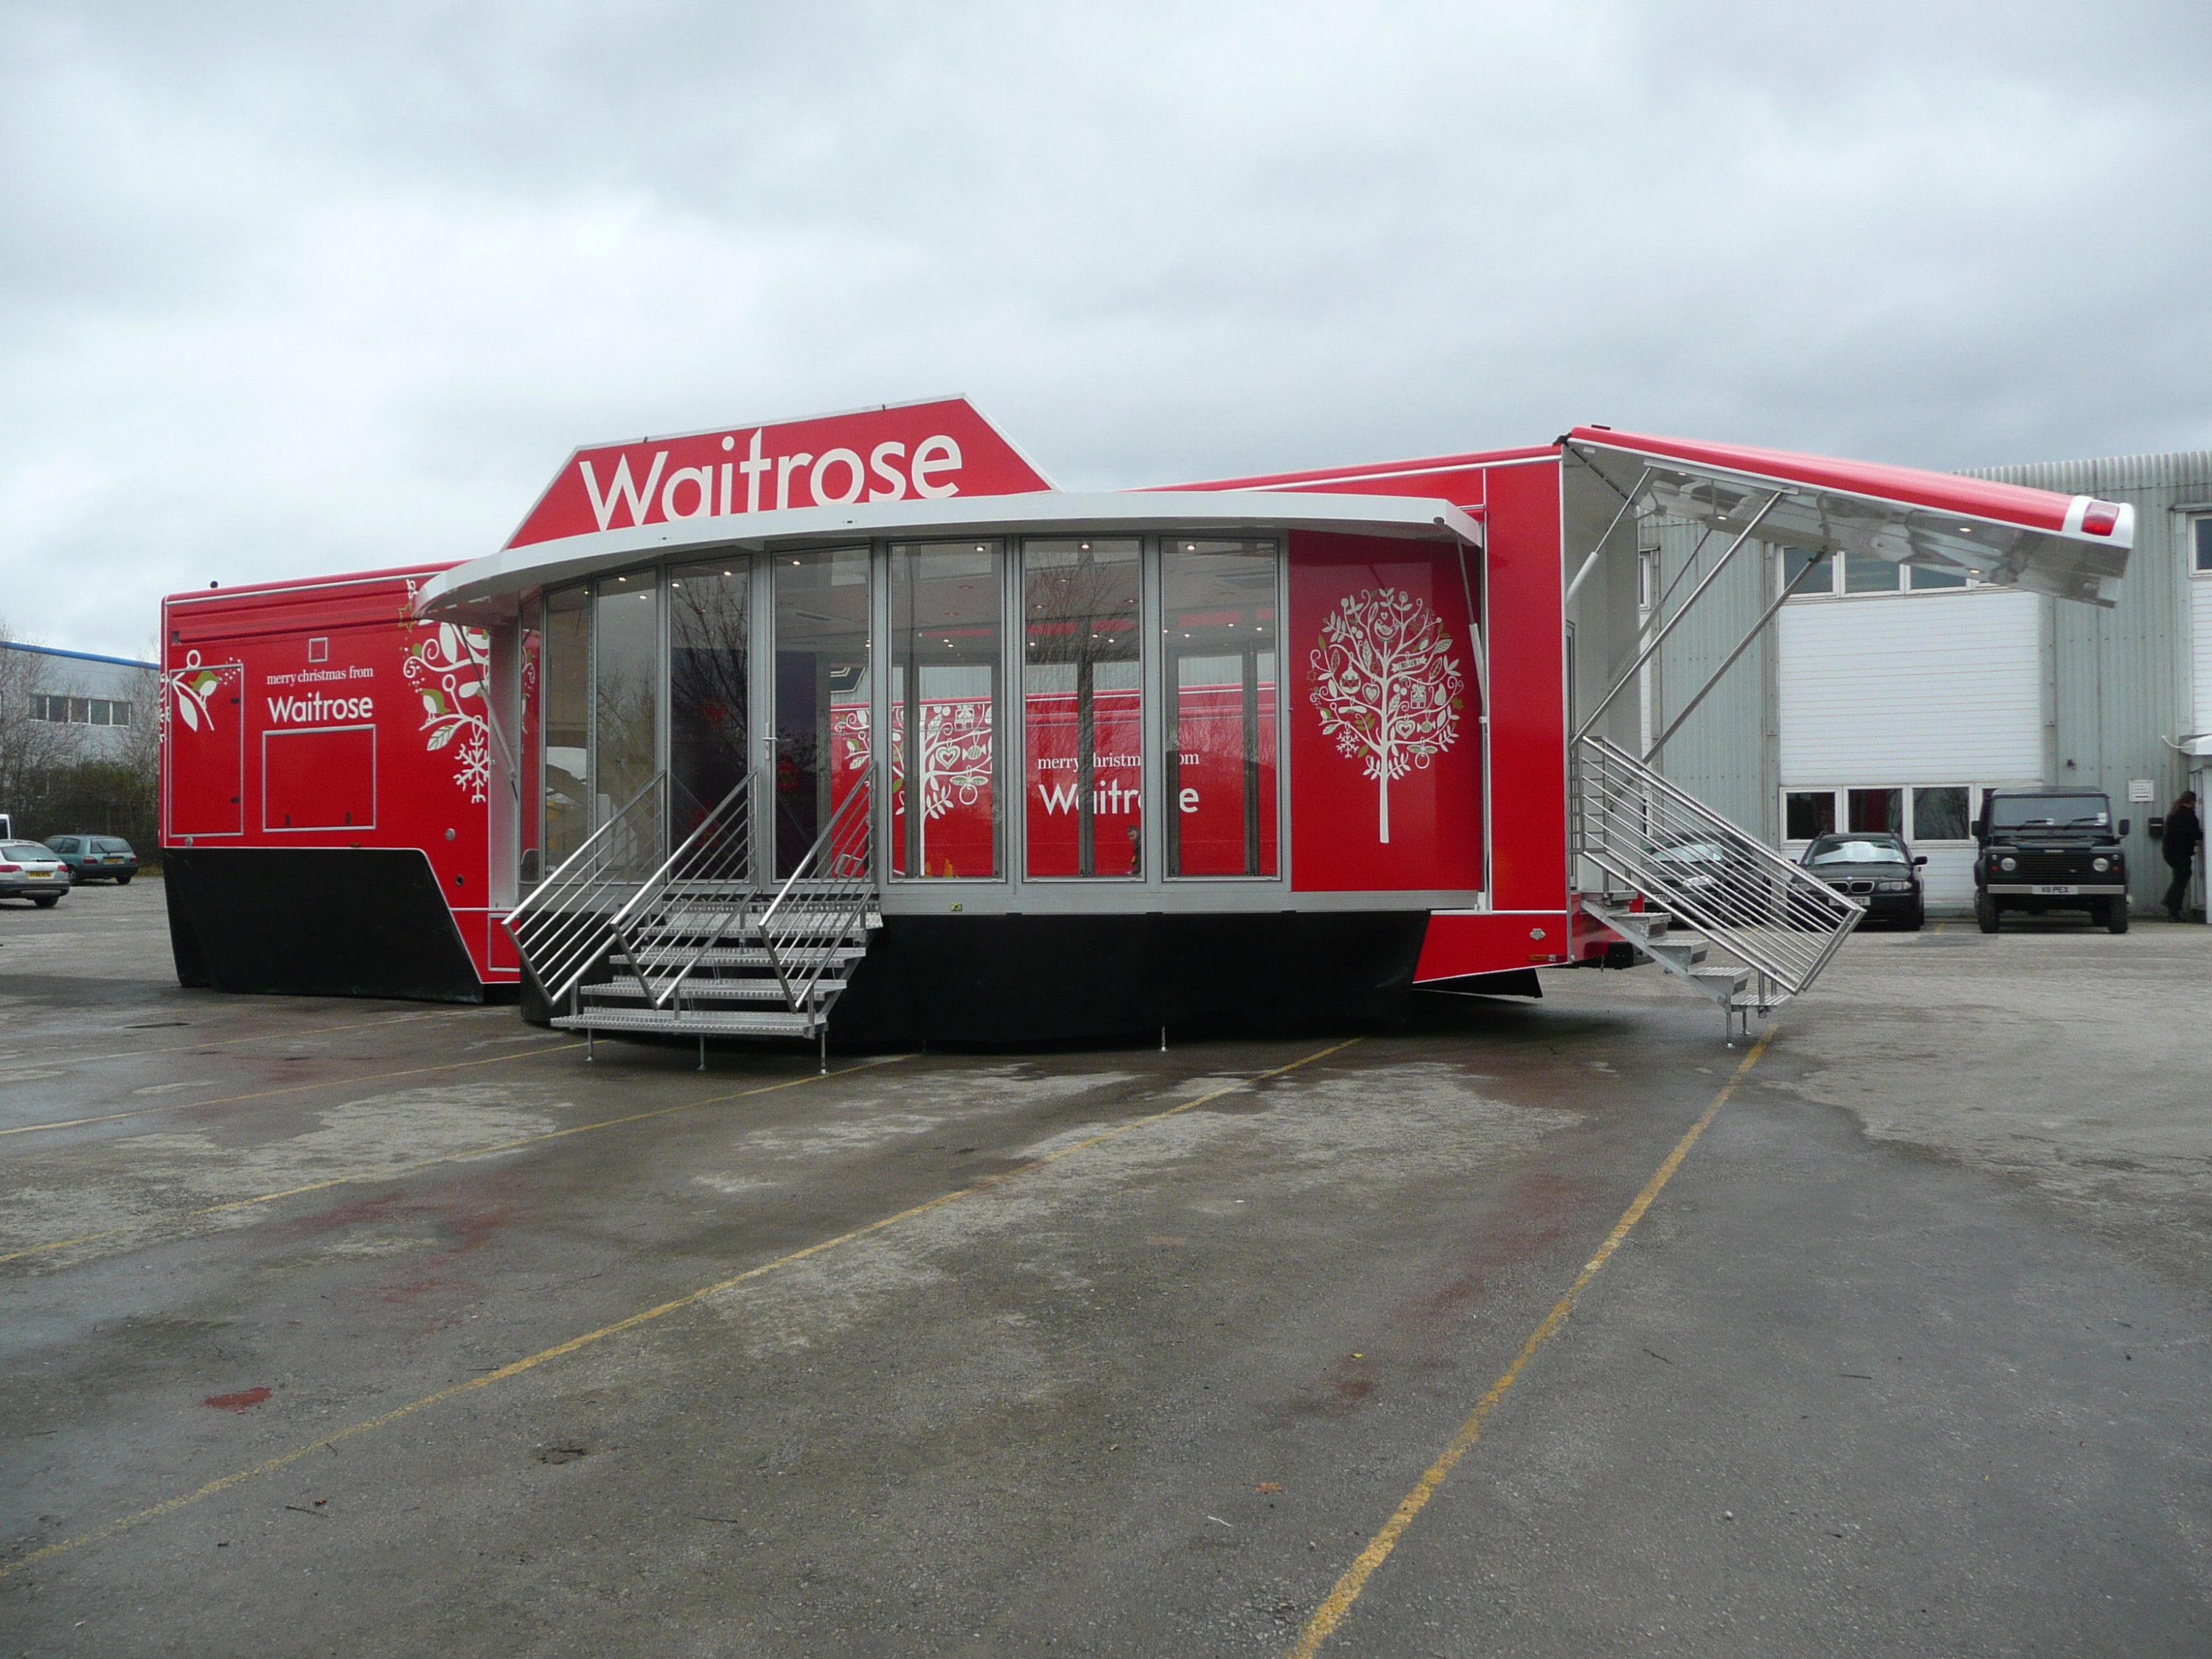 Waitrose Supermarkets Articulated Exhibition Trailers for Cookery Demonstration